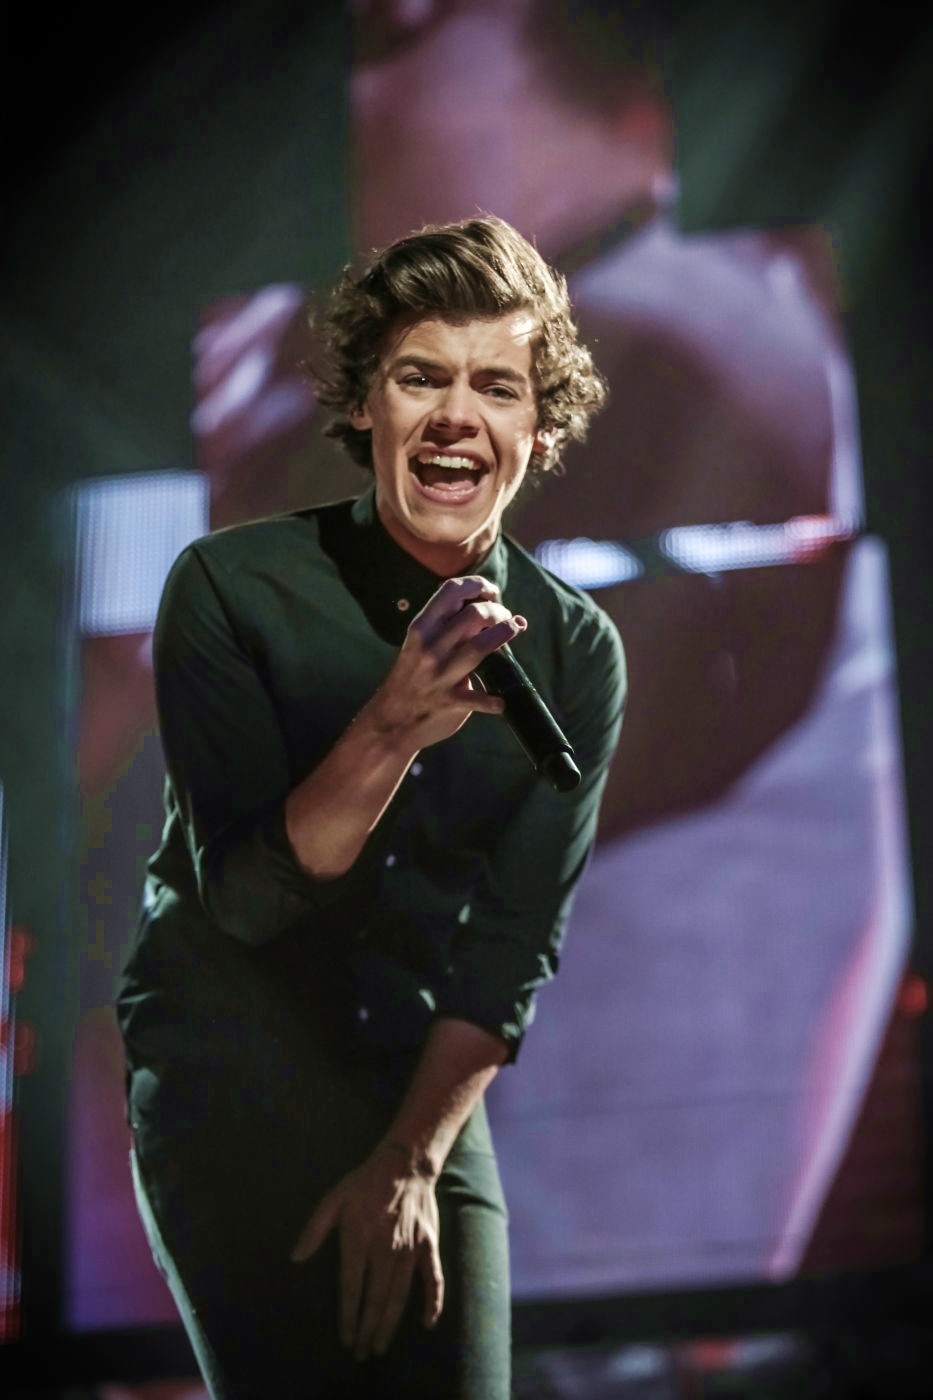 Harry Styles in TriStar Pictures' One Direction: This Is Us (2013)